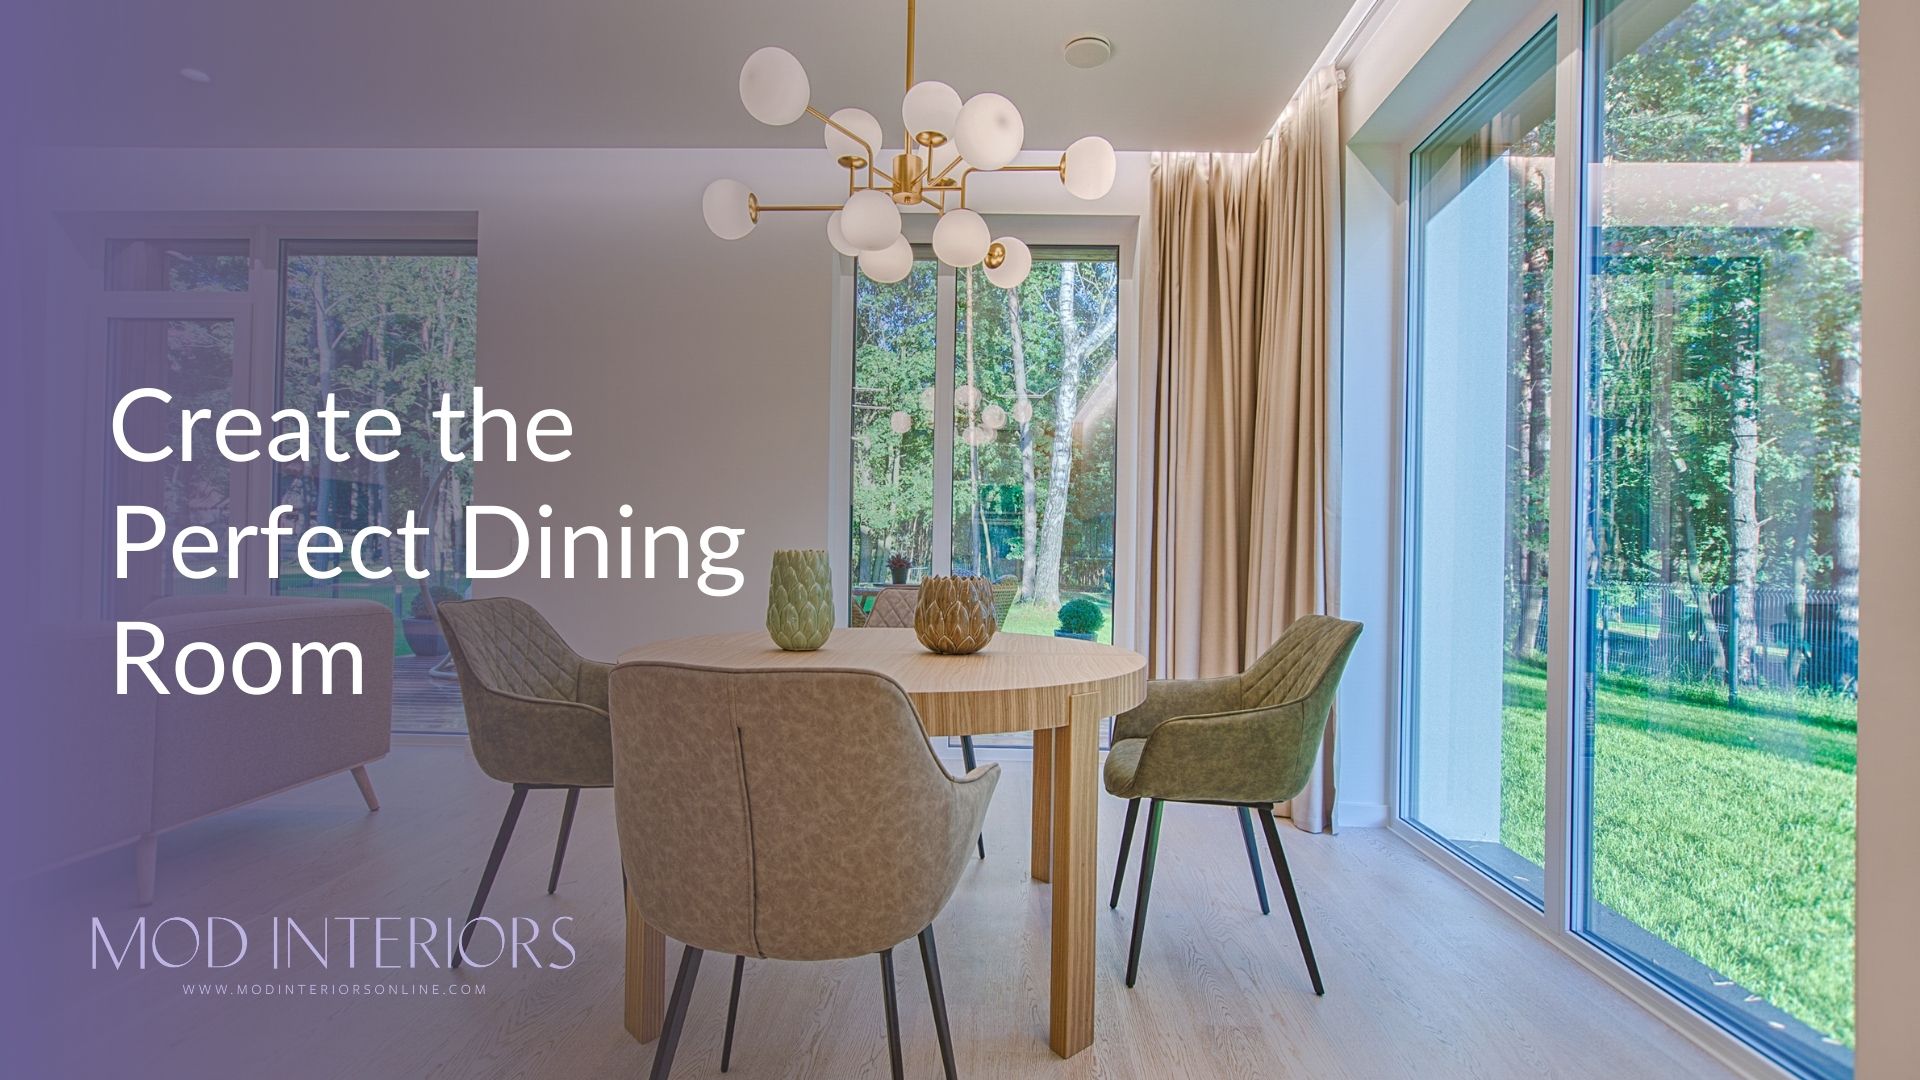 4 Principles for Creating the Perfect Dining Room